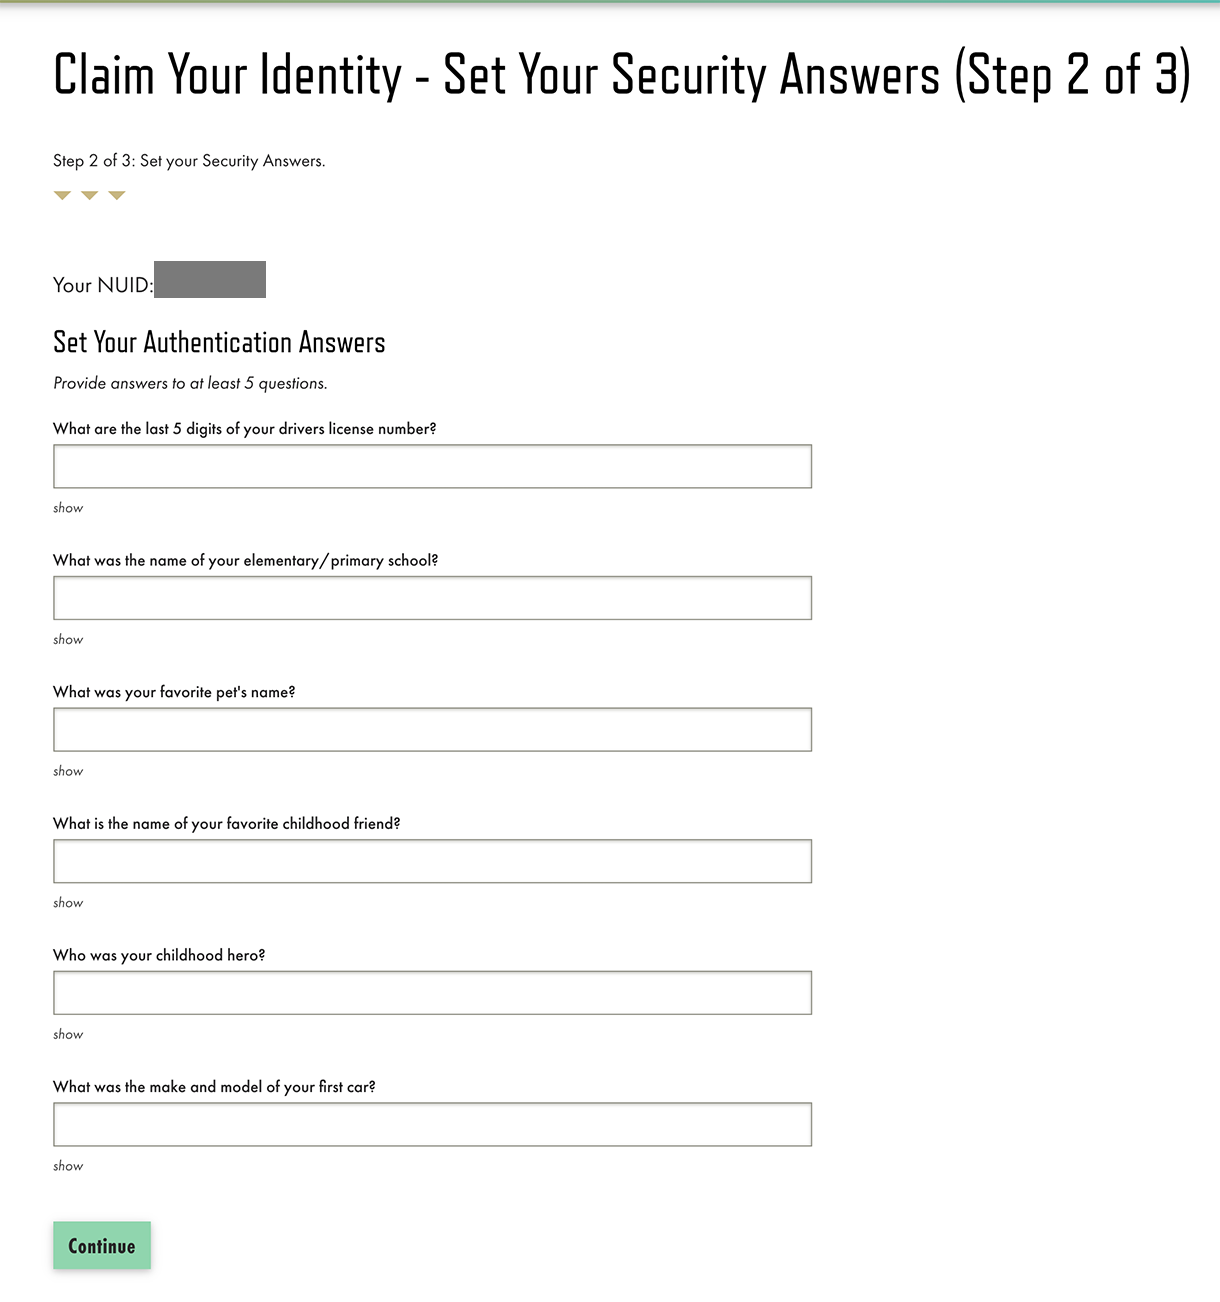 Please answer 5/6 security questions